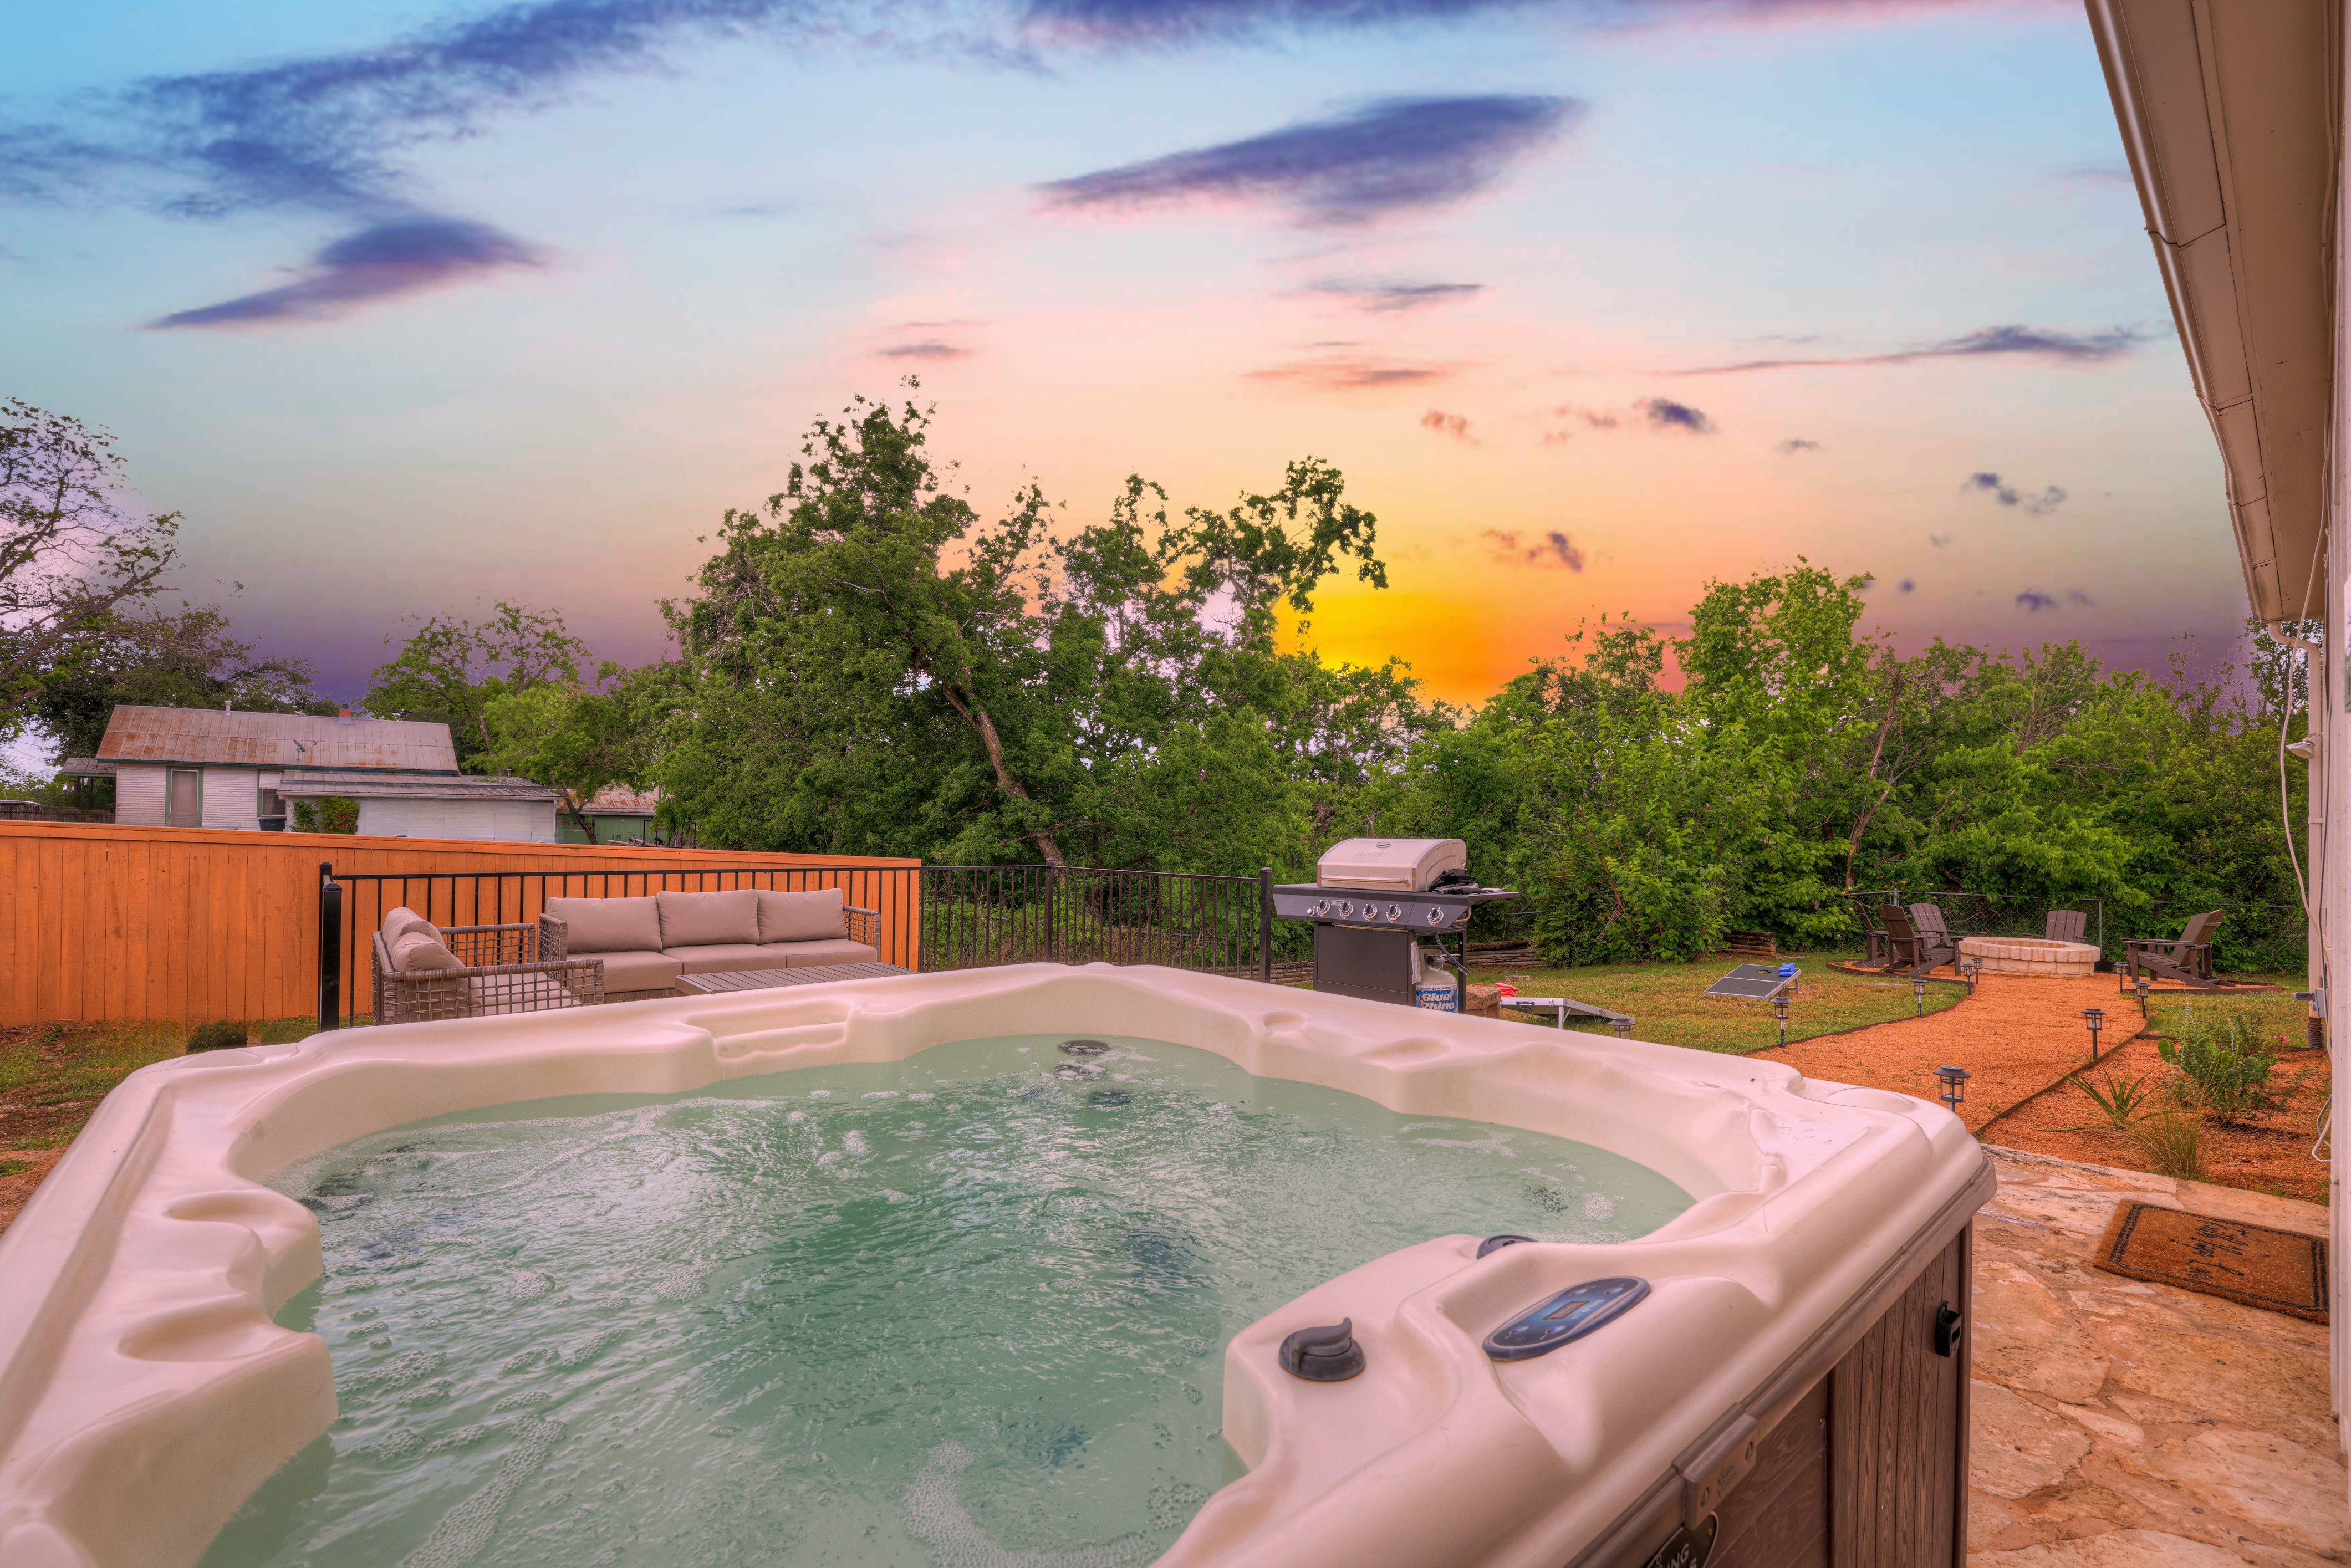 Take a soak in the hot tub to catch the beautiful sunset.